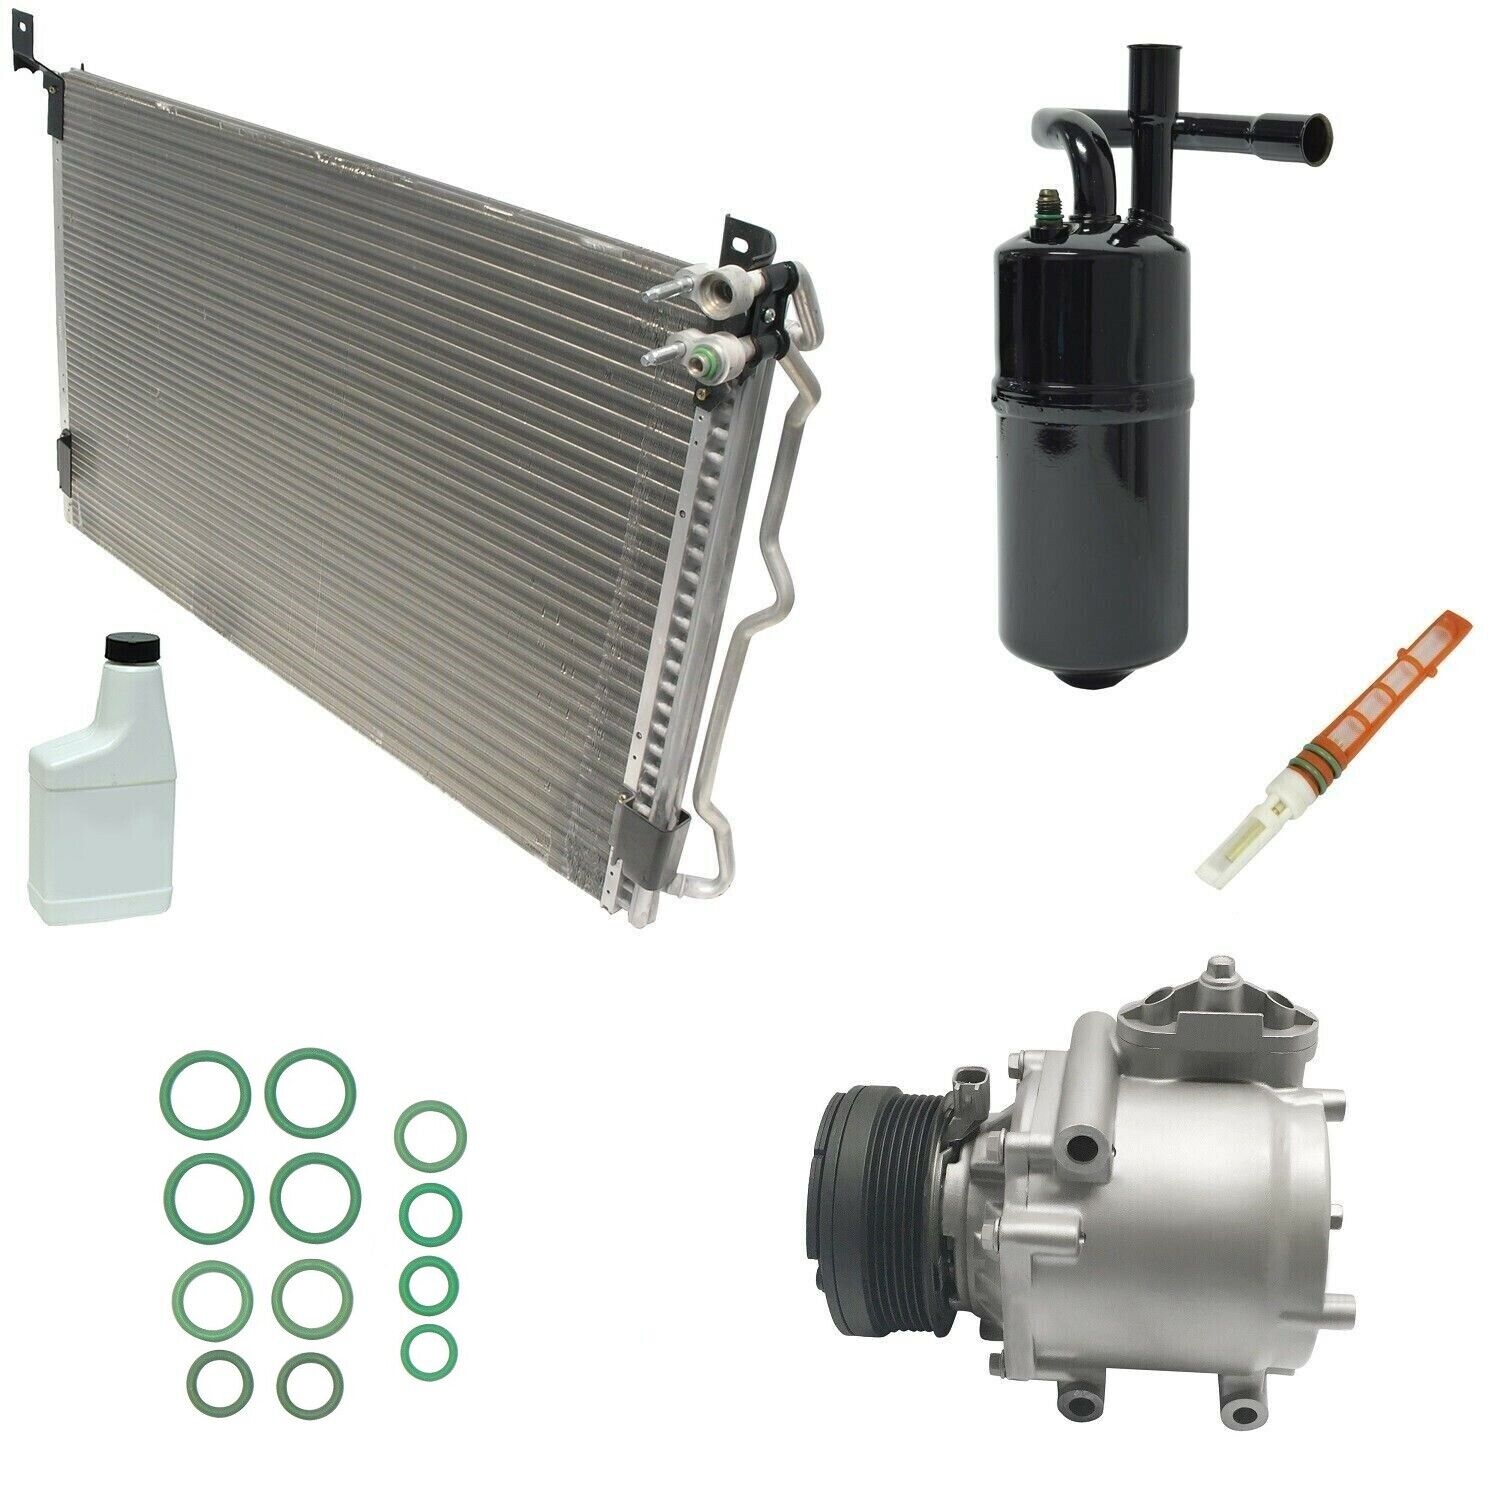 REMAN COMPLETE A/C COMPRESSOR KIT GG588 WITH CONDENSER